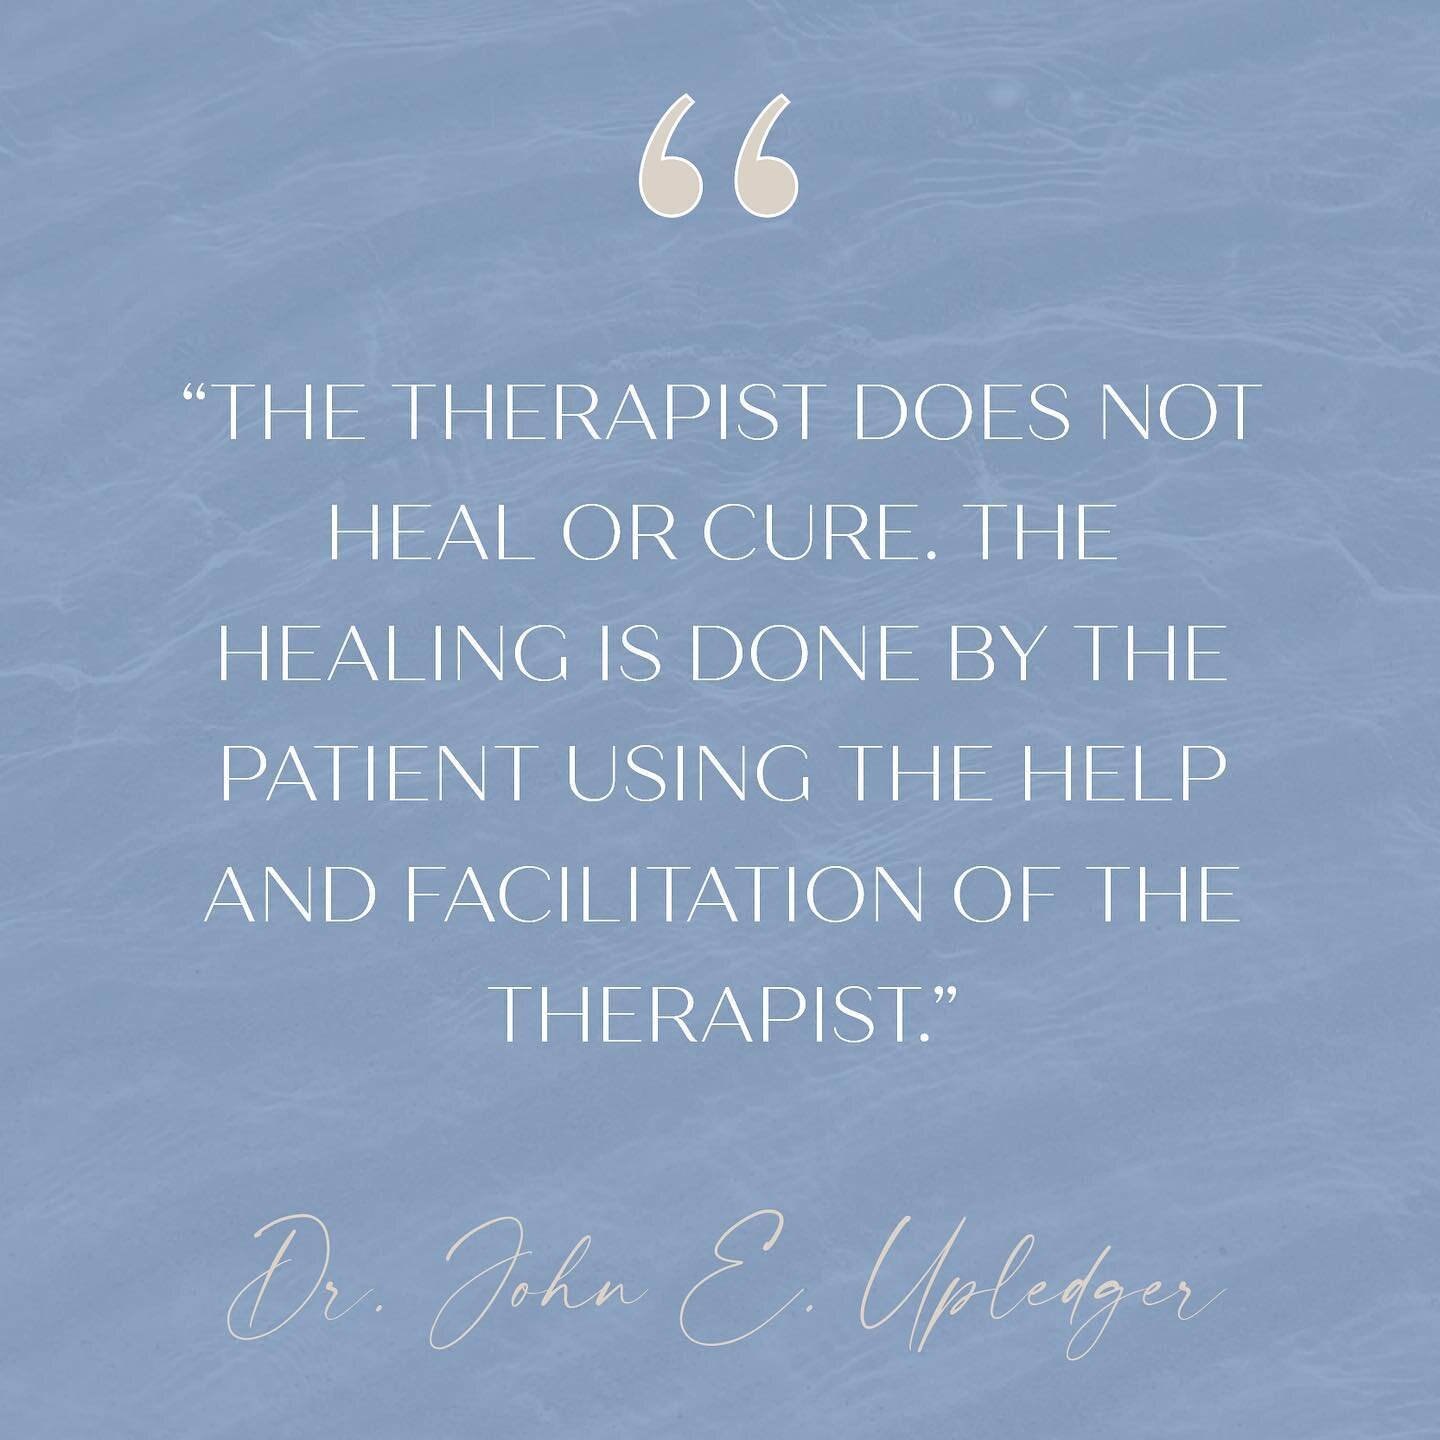 As a massage therapist, I understand the human body has the power to adapt, change and heal. My goal is to make it possible for these changes to occur through a unique approach to bodywork, and to empower my clients to be part of their own healing jo